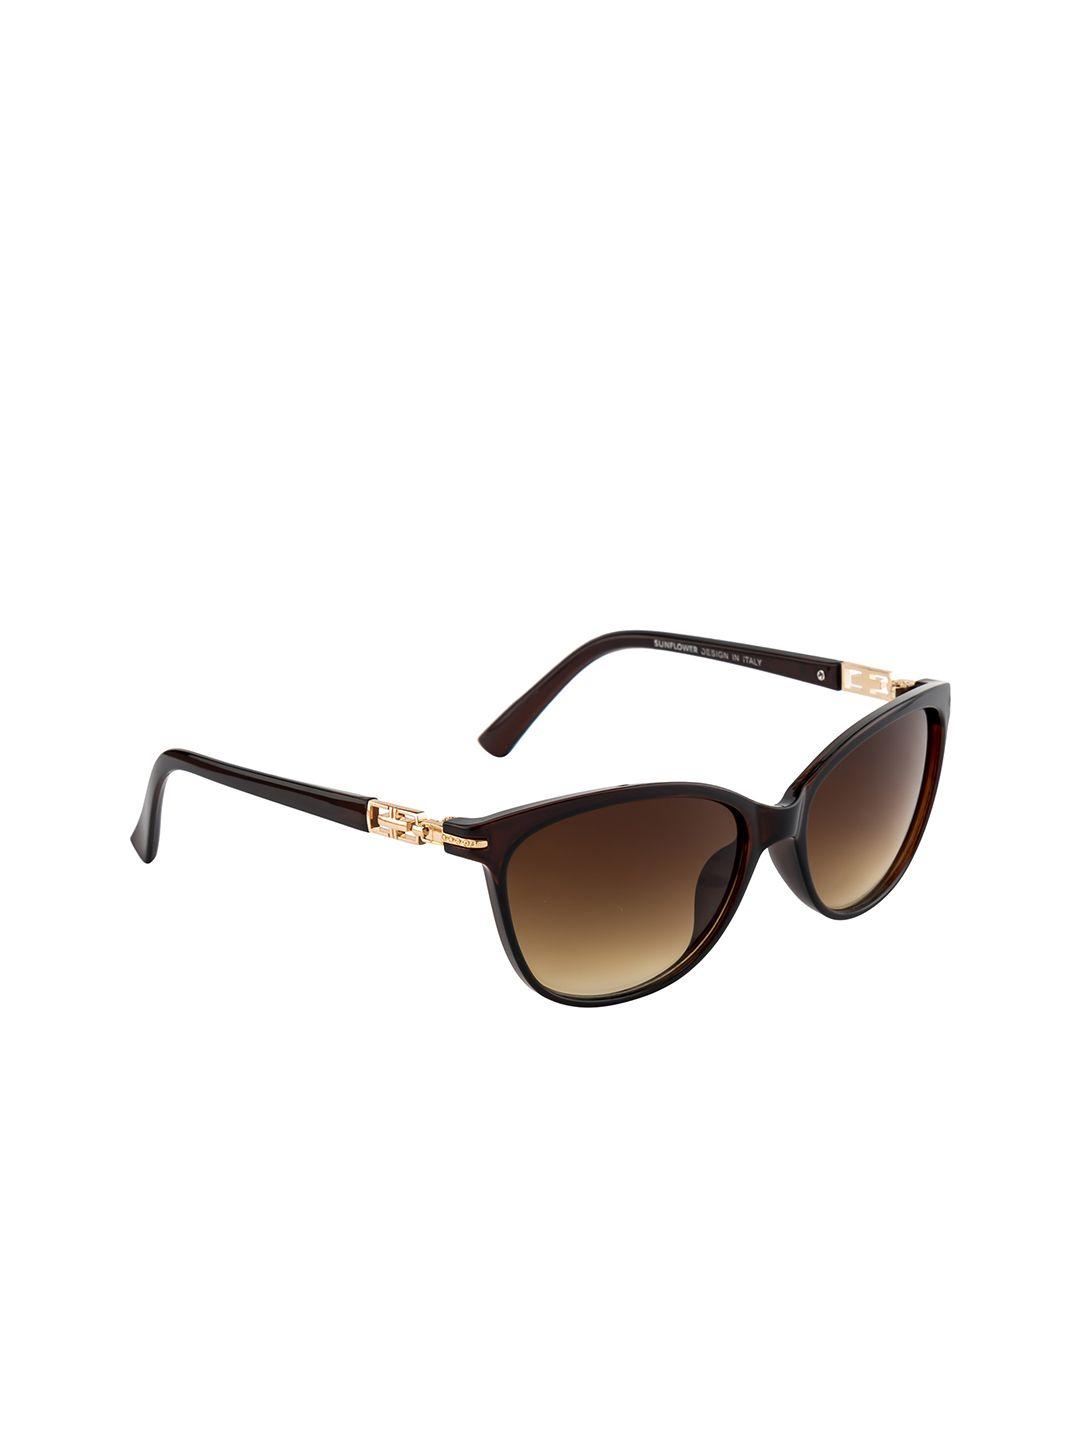 dressberry brown oval sunglasses with uv protected lens